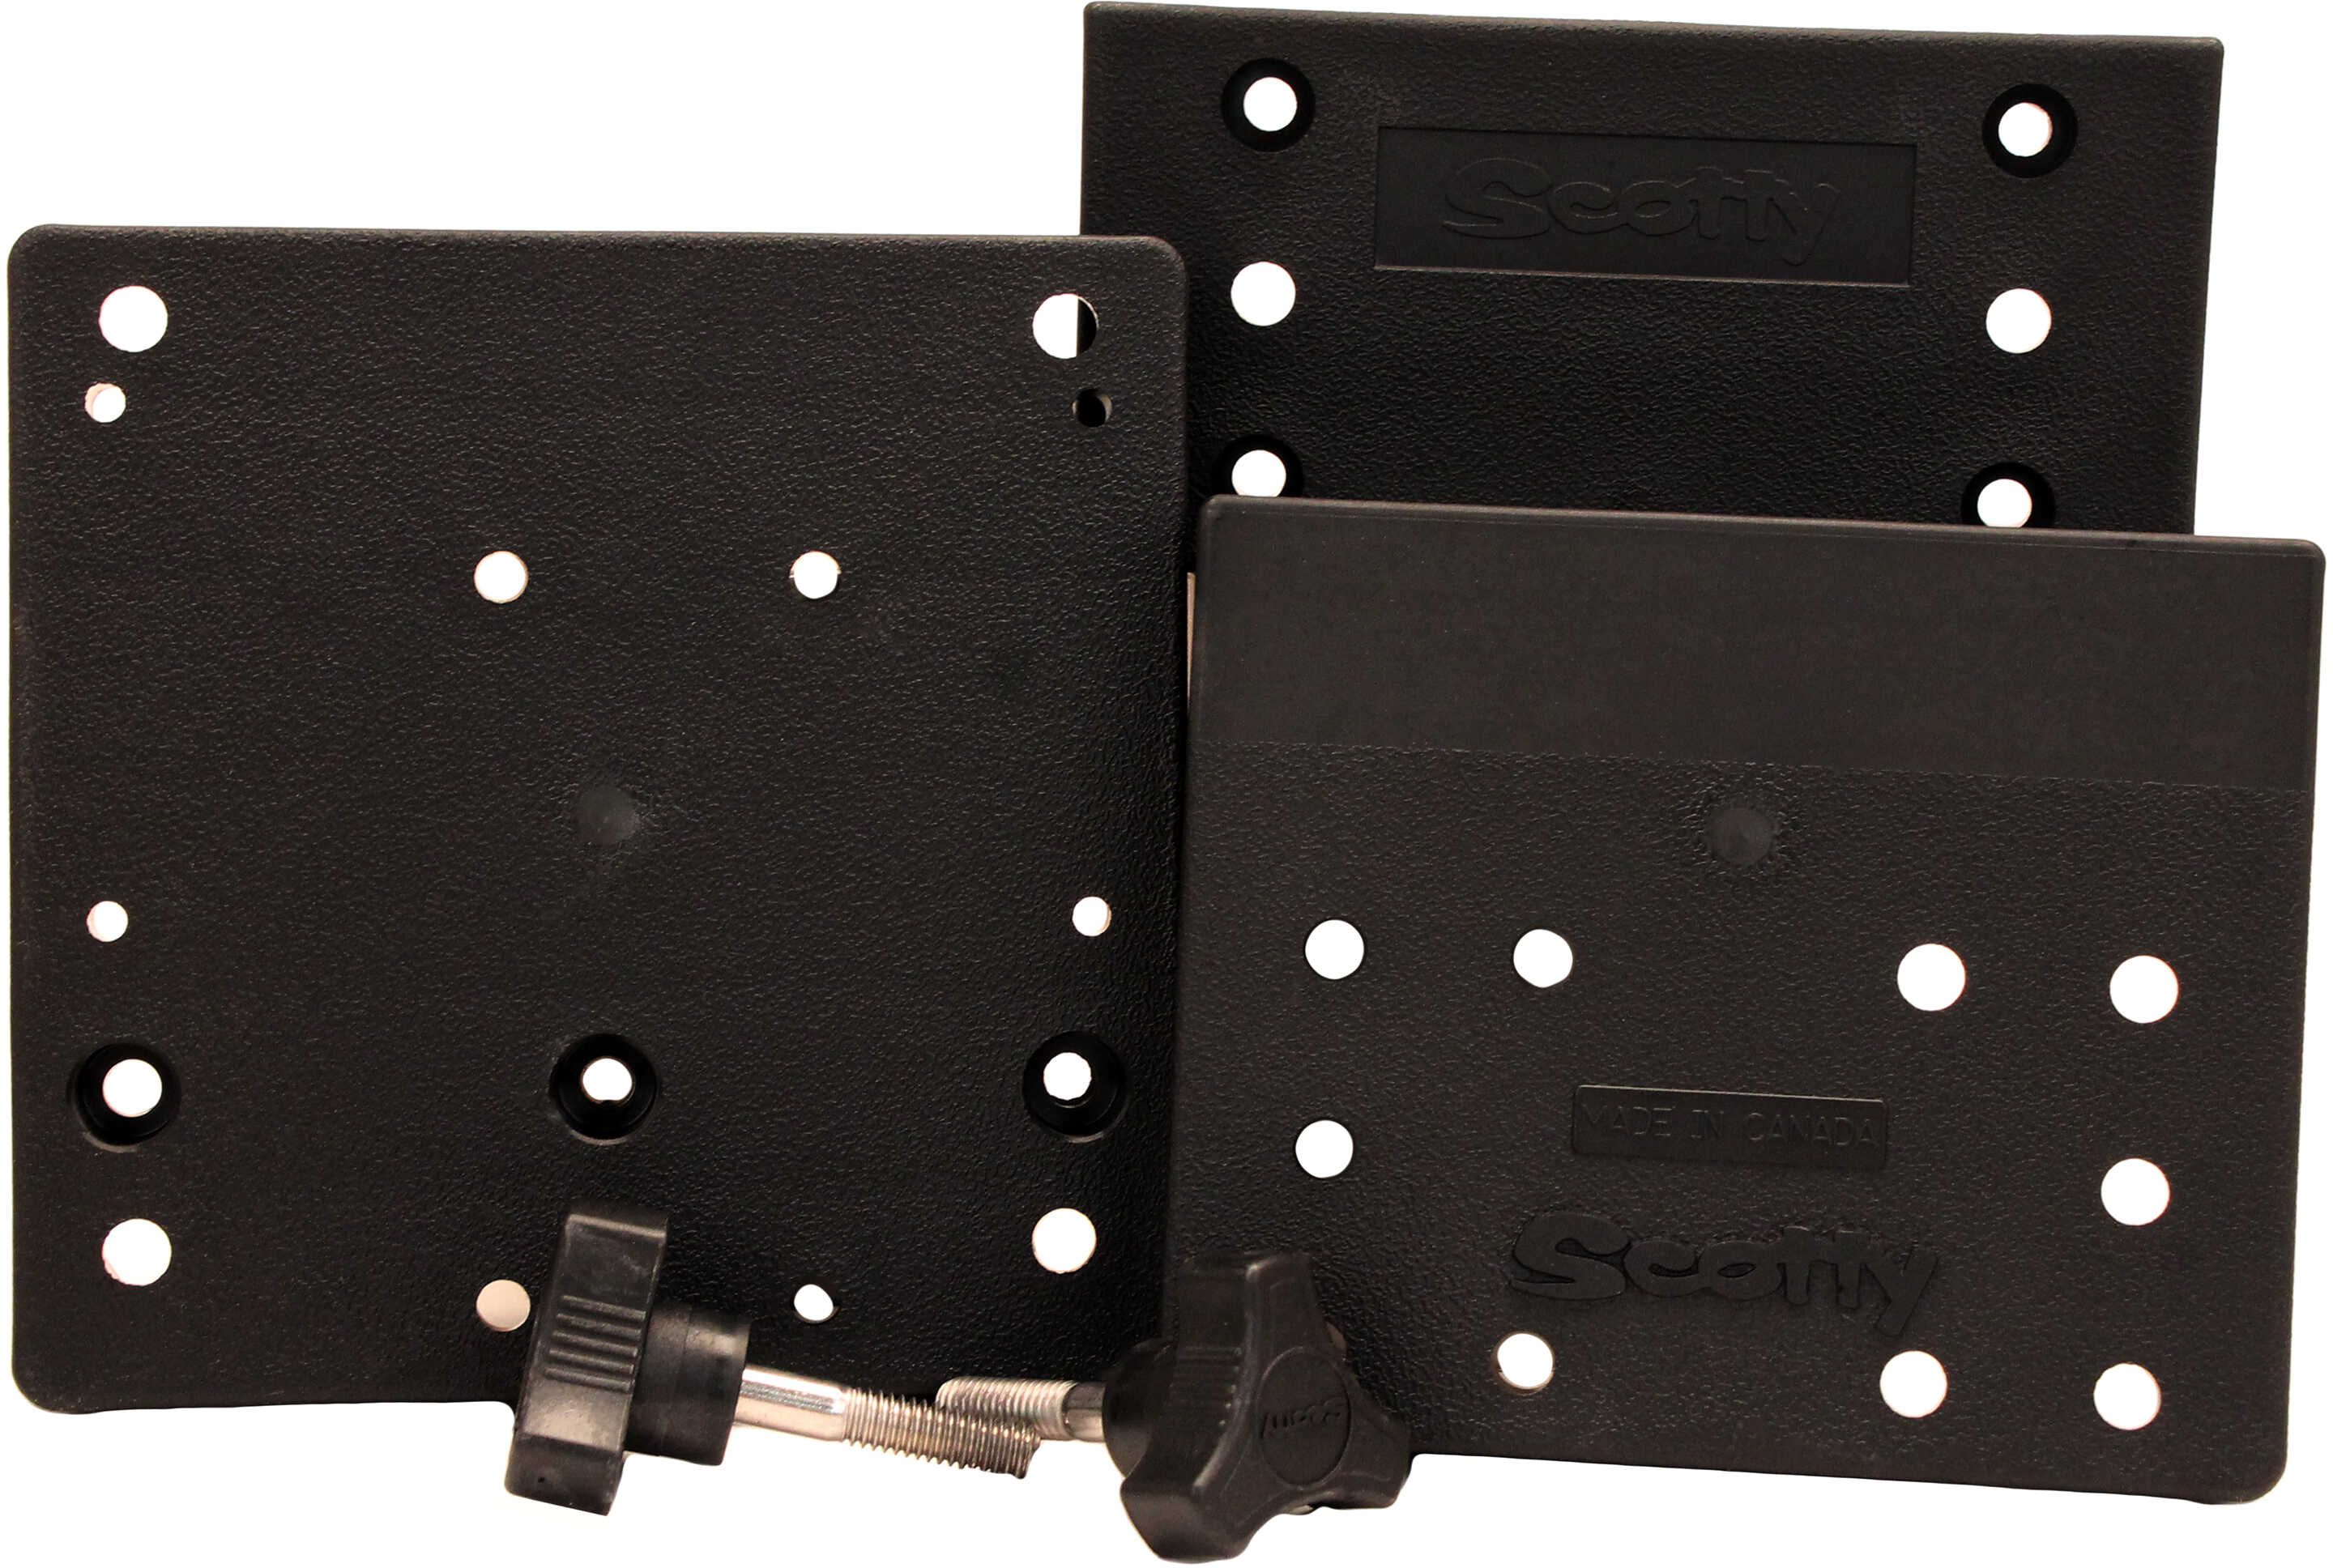 Scotty Right Angle Side Mounting Bracket Md: 1025